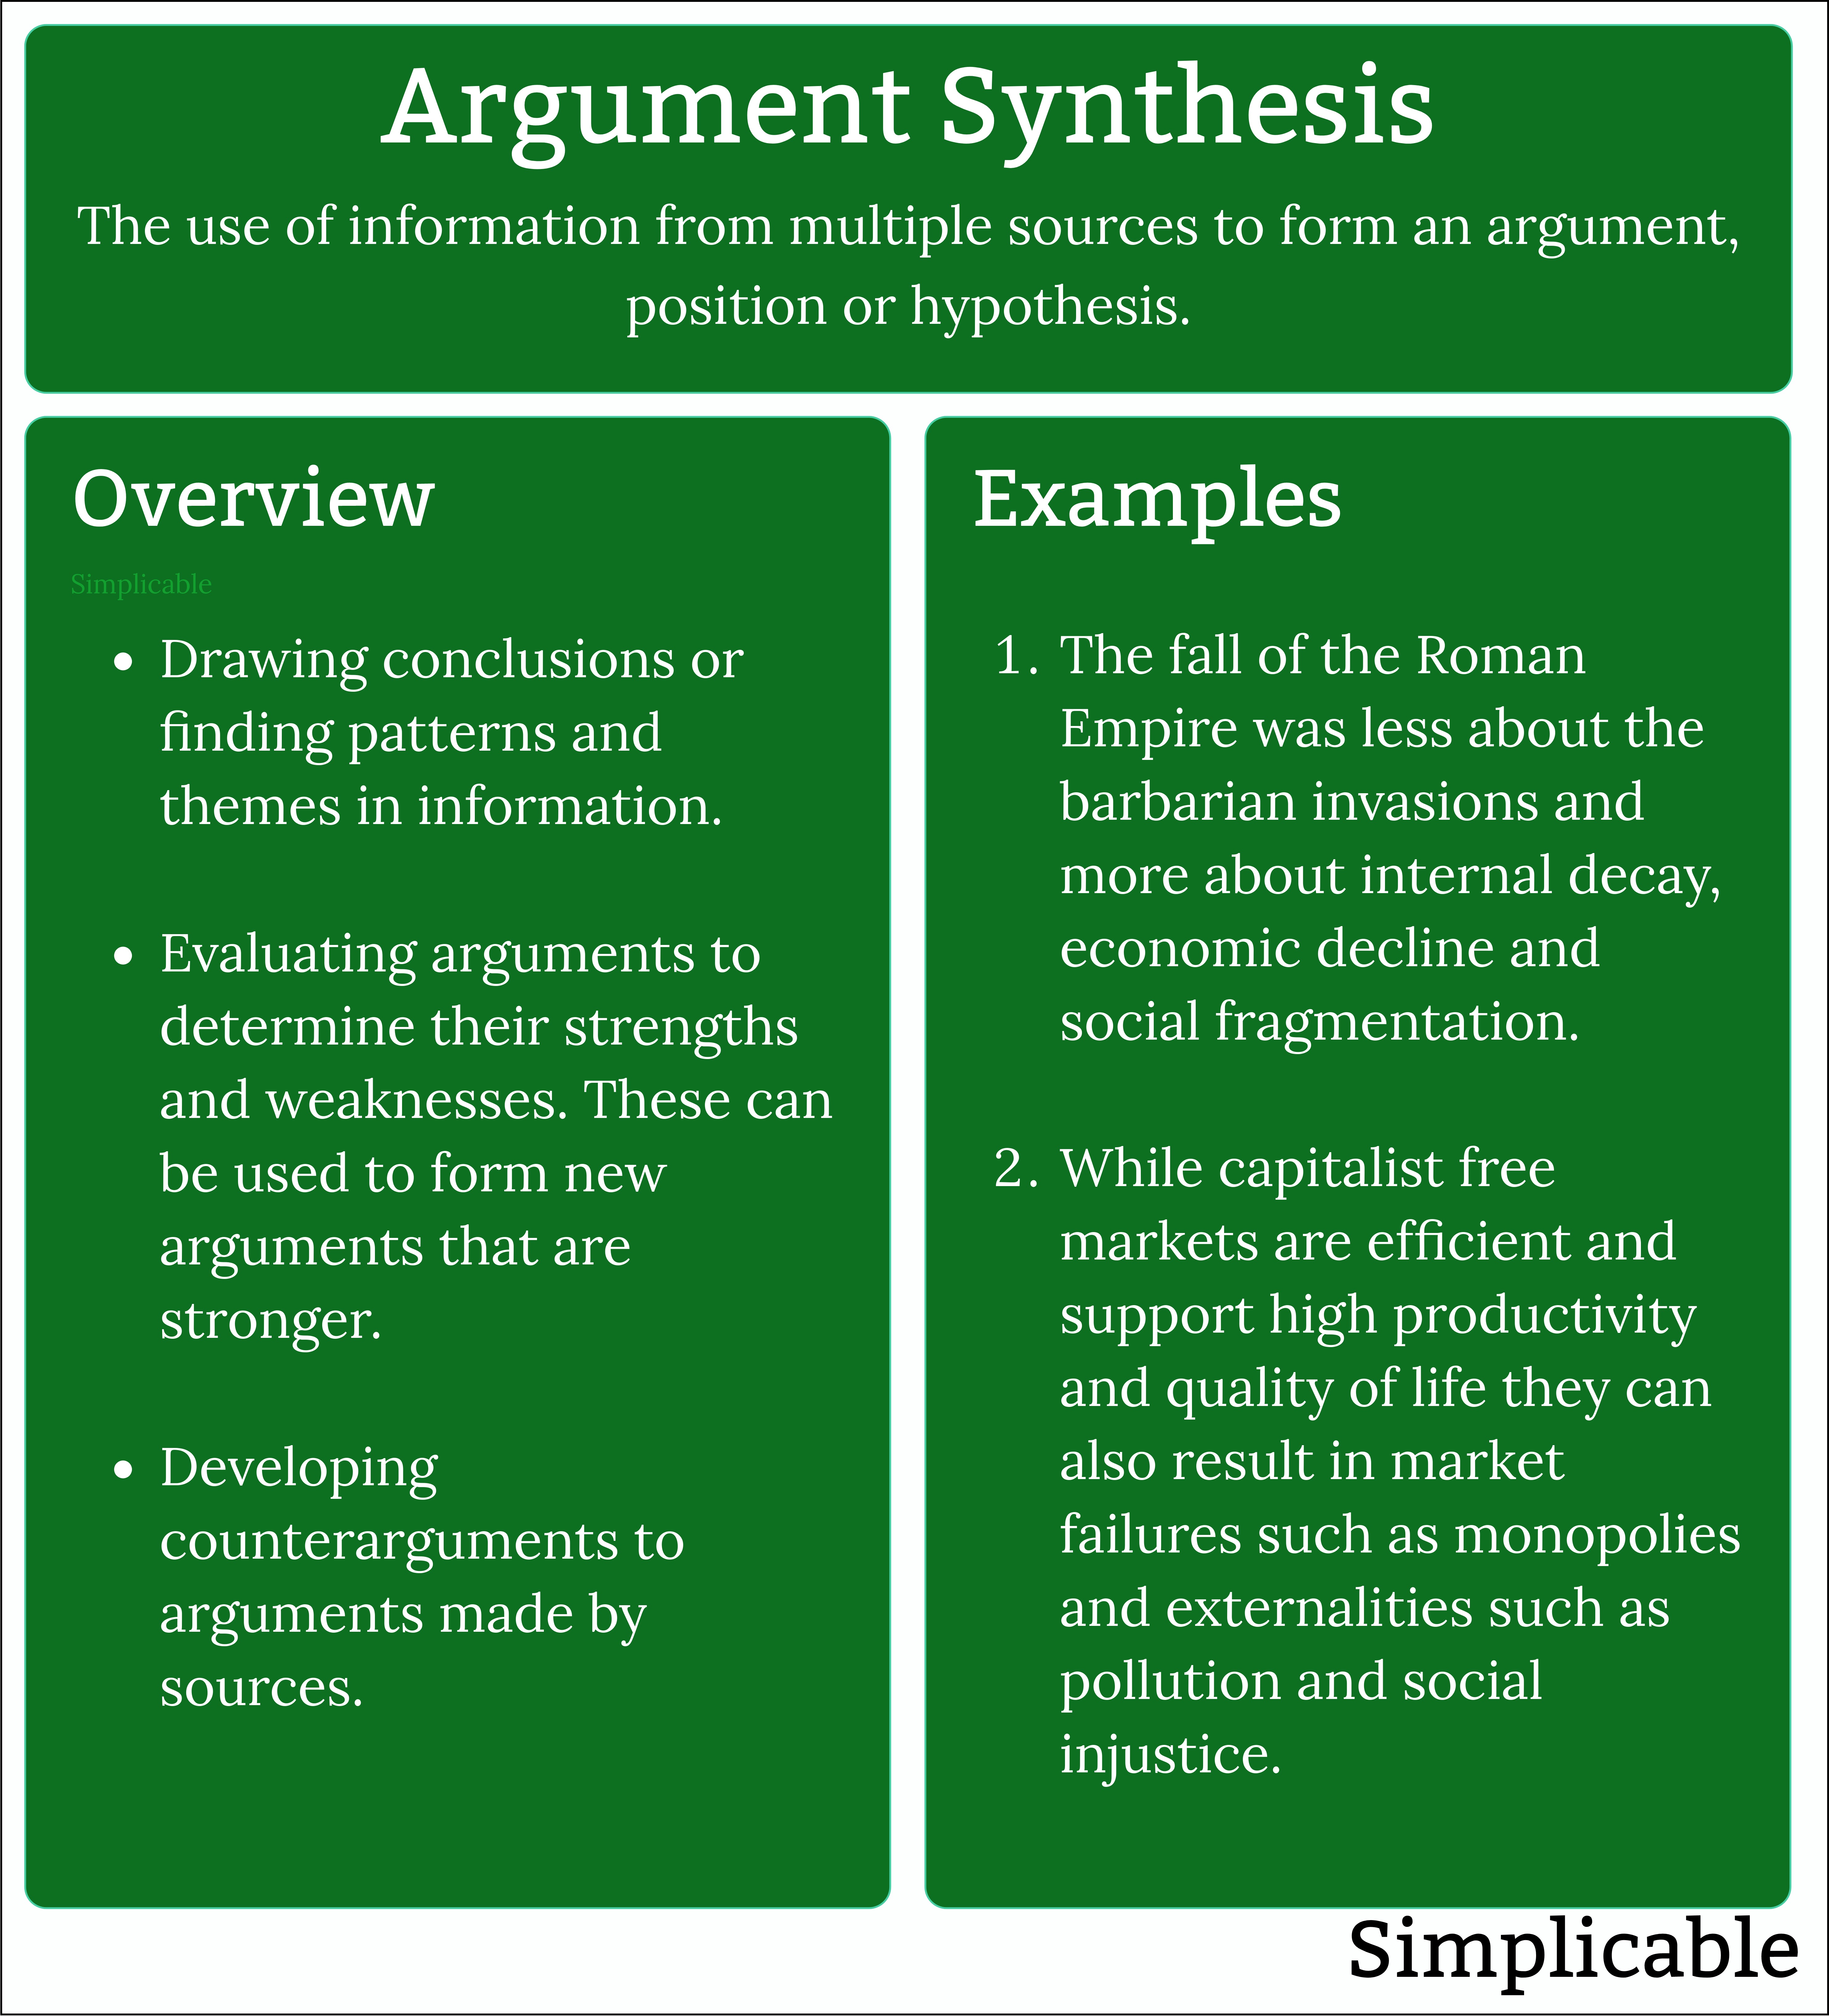 argument synthesis summary and examples